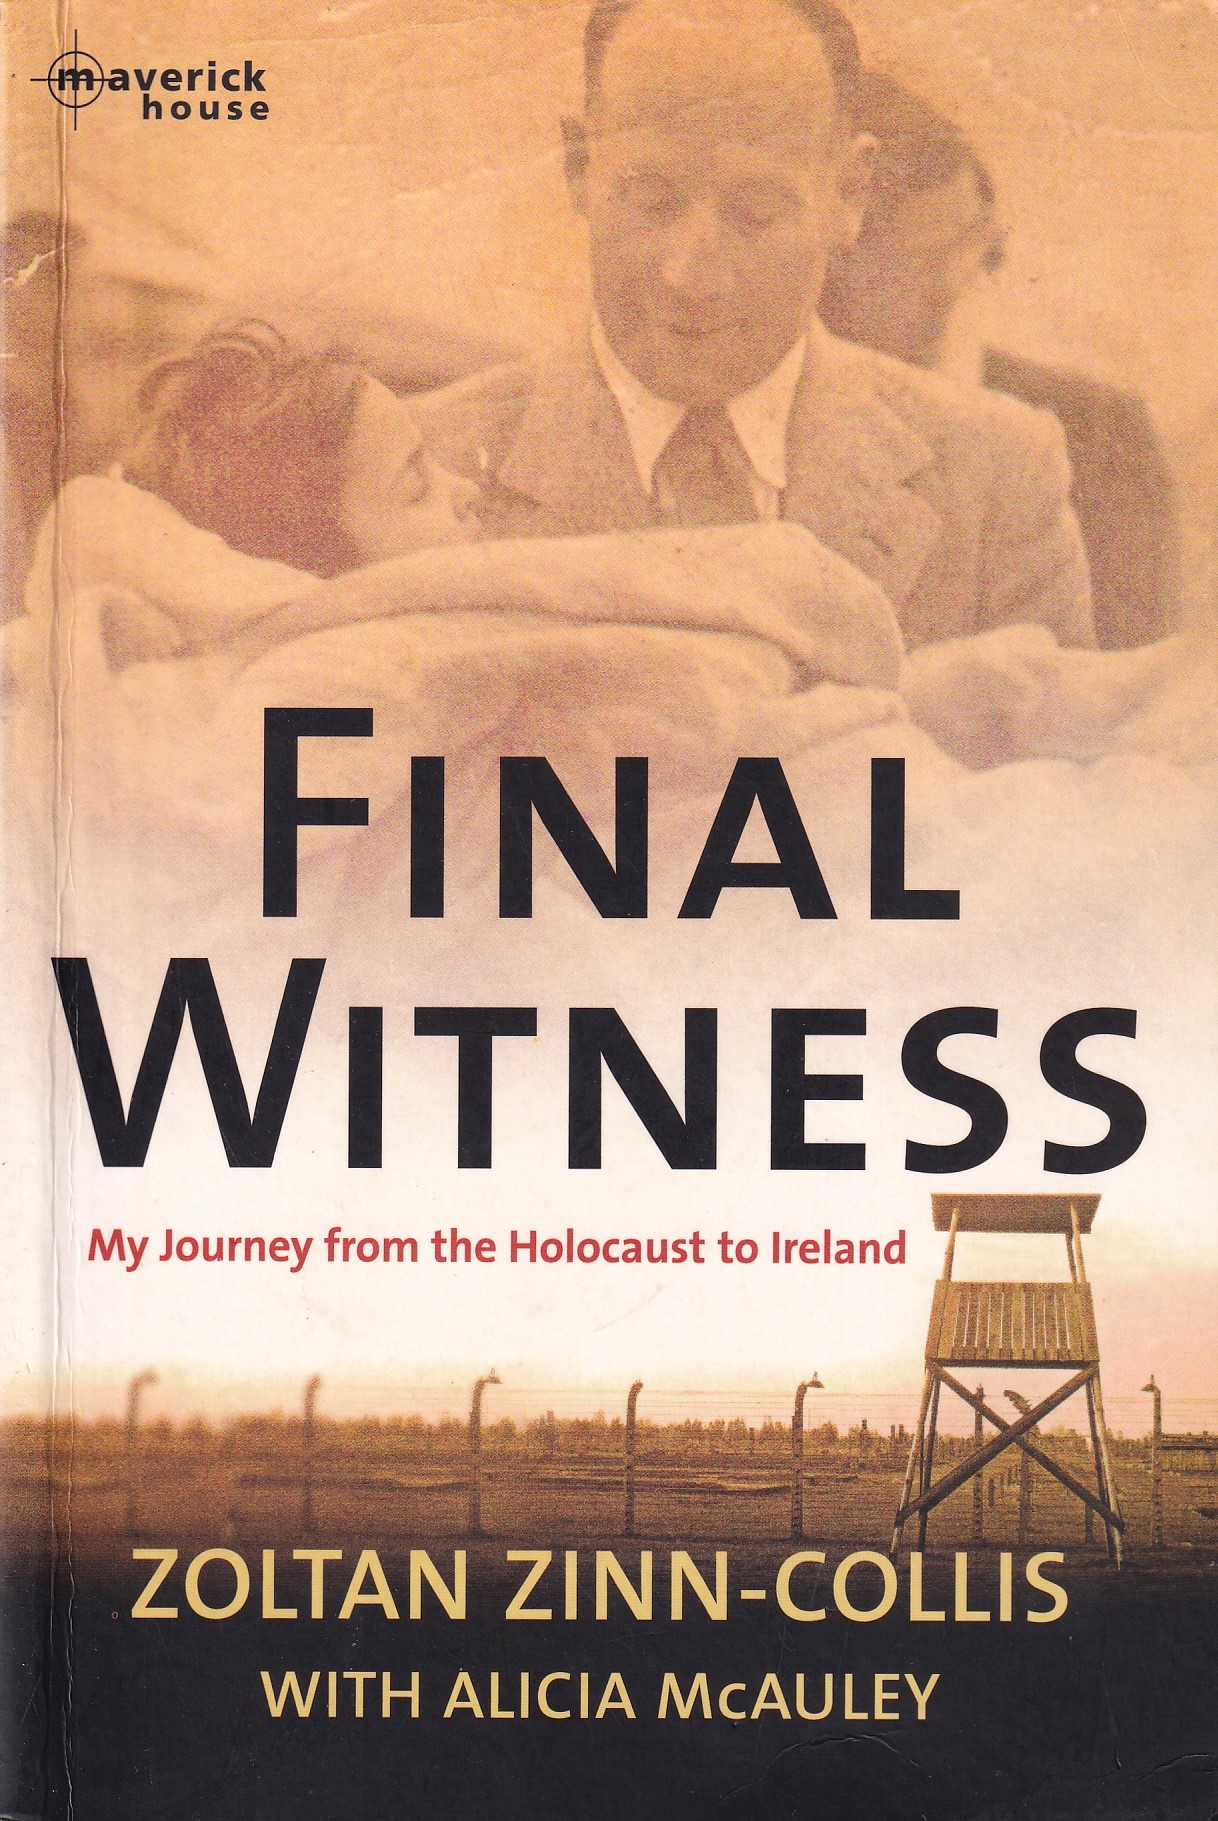 Final Witness: My Journey from the Holocaust to Ireland by Zoltan Zinn-Collis with Alicia McAuley